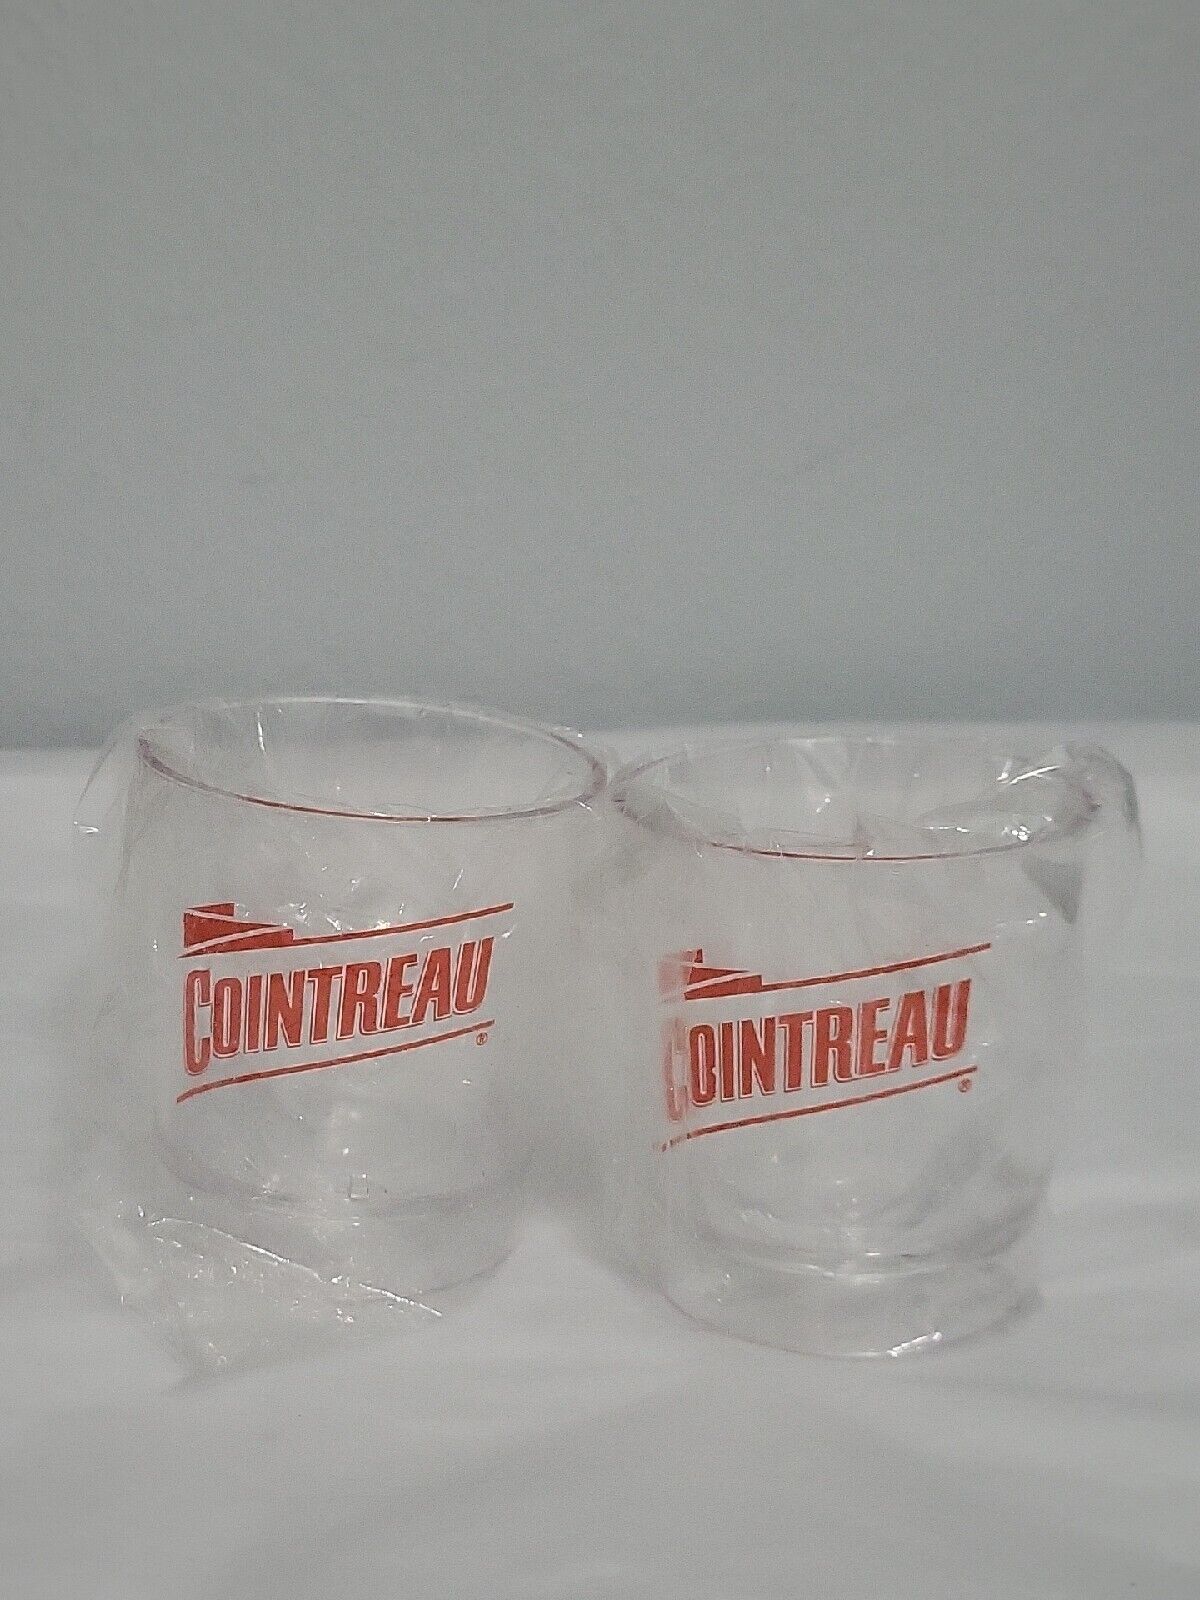 Cointreau Plastic Cups Lot of 2 New Advertising Collectible Barware Shots